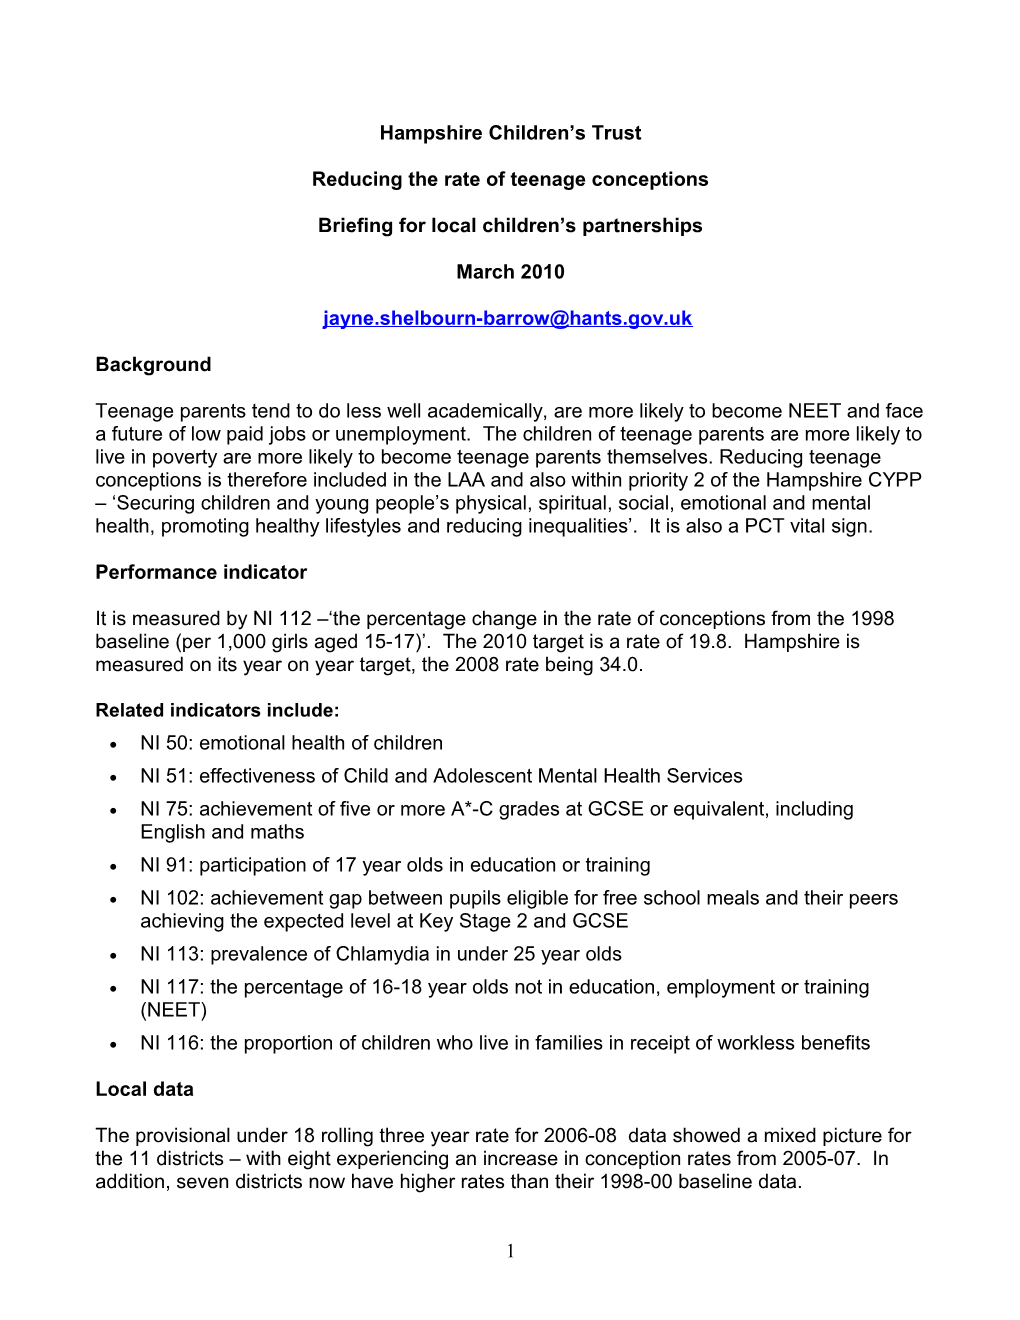 Guidance Note for Local Partnerships Around Reducing Teenage Conceptions